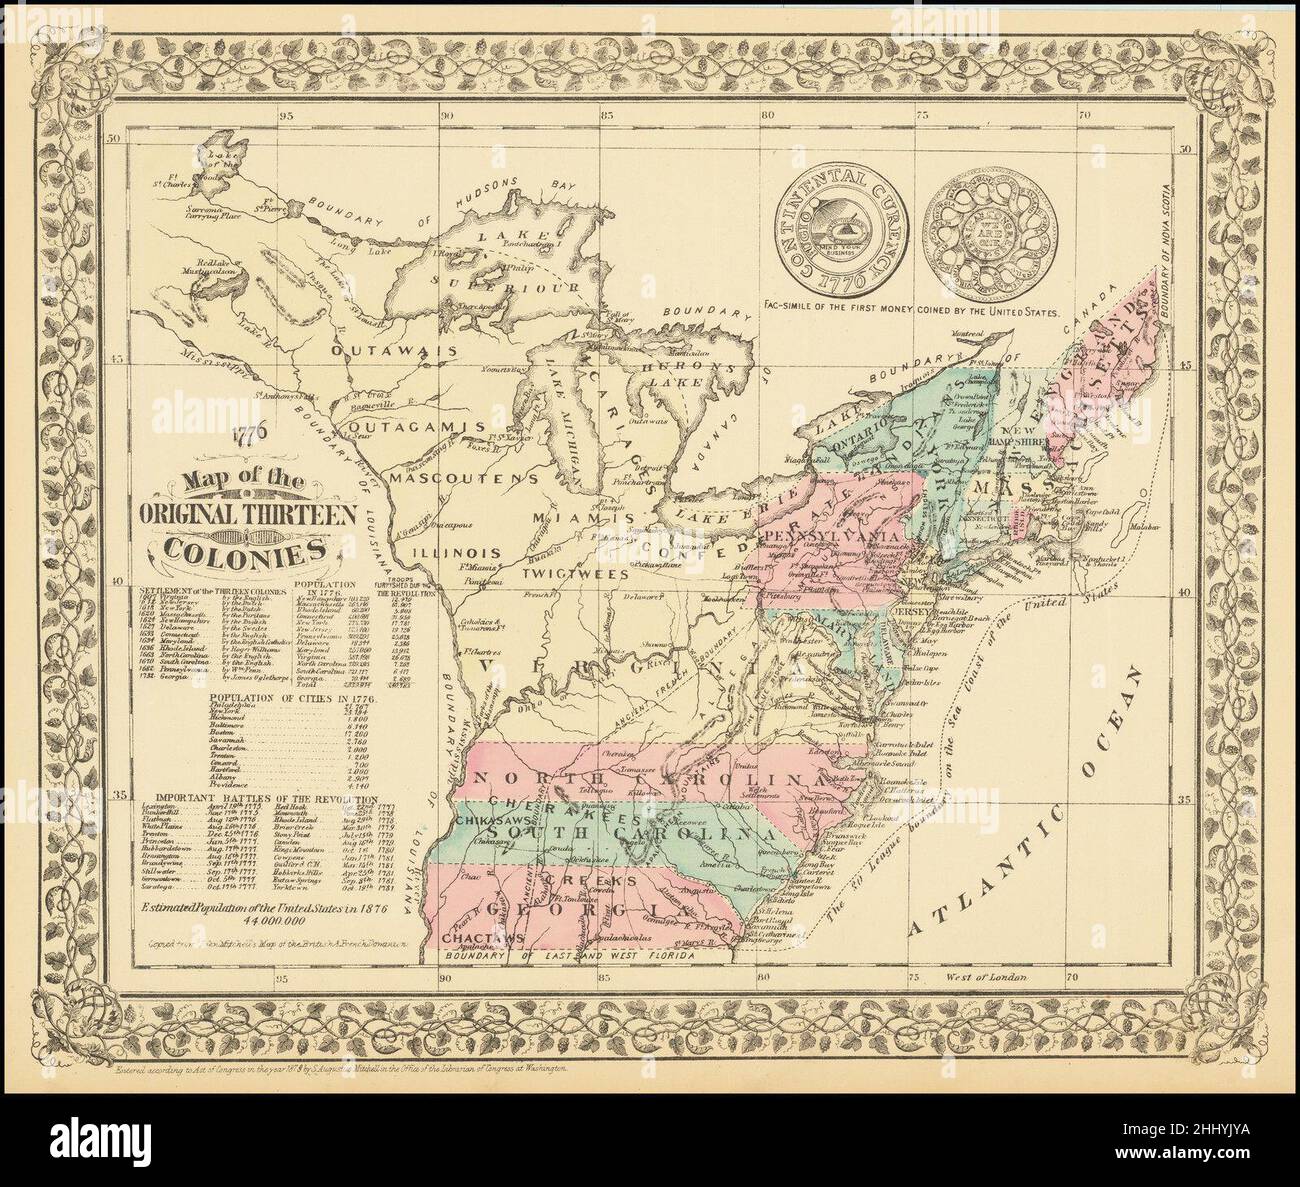 Samuel Augustus Mitchell Jr., 1776 -- Map of the Original Thirteen Colonies map, showing the 13 colonies, Indian Tribes, and details dating to 1776 Stock Photo